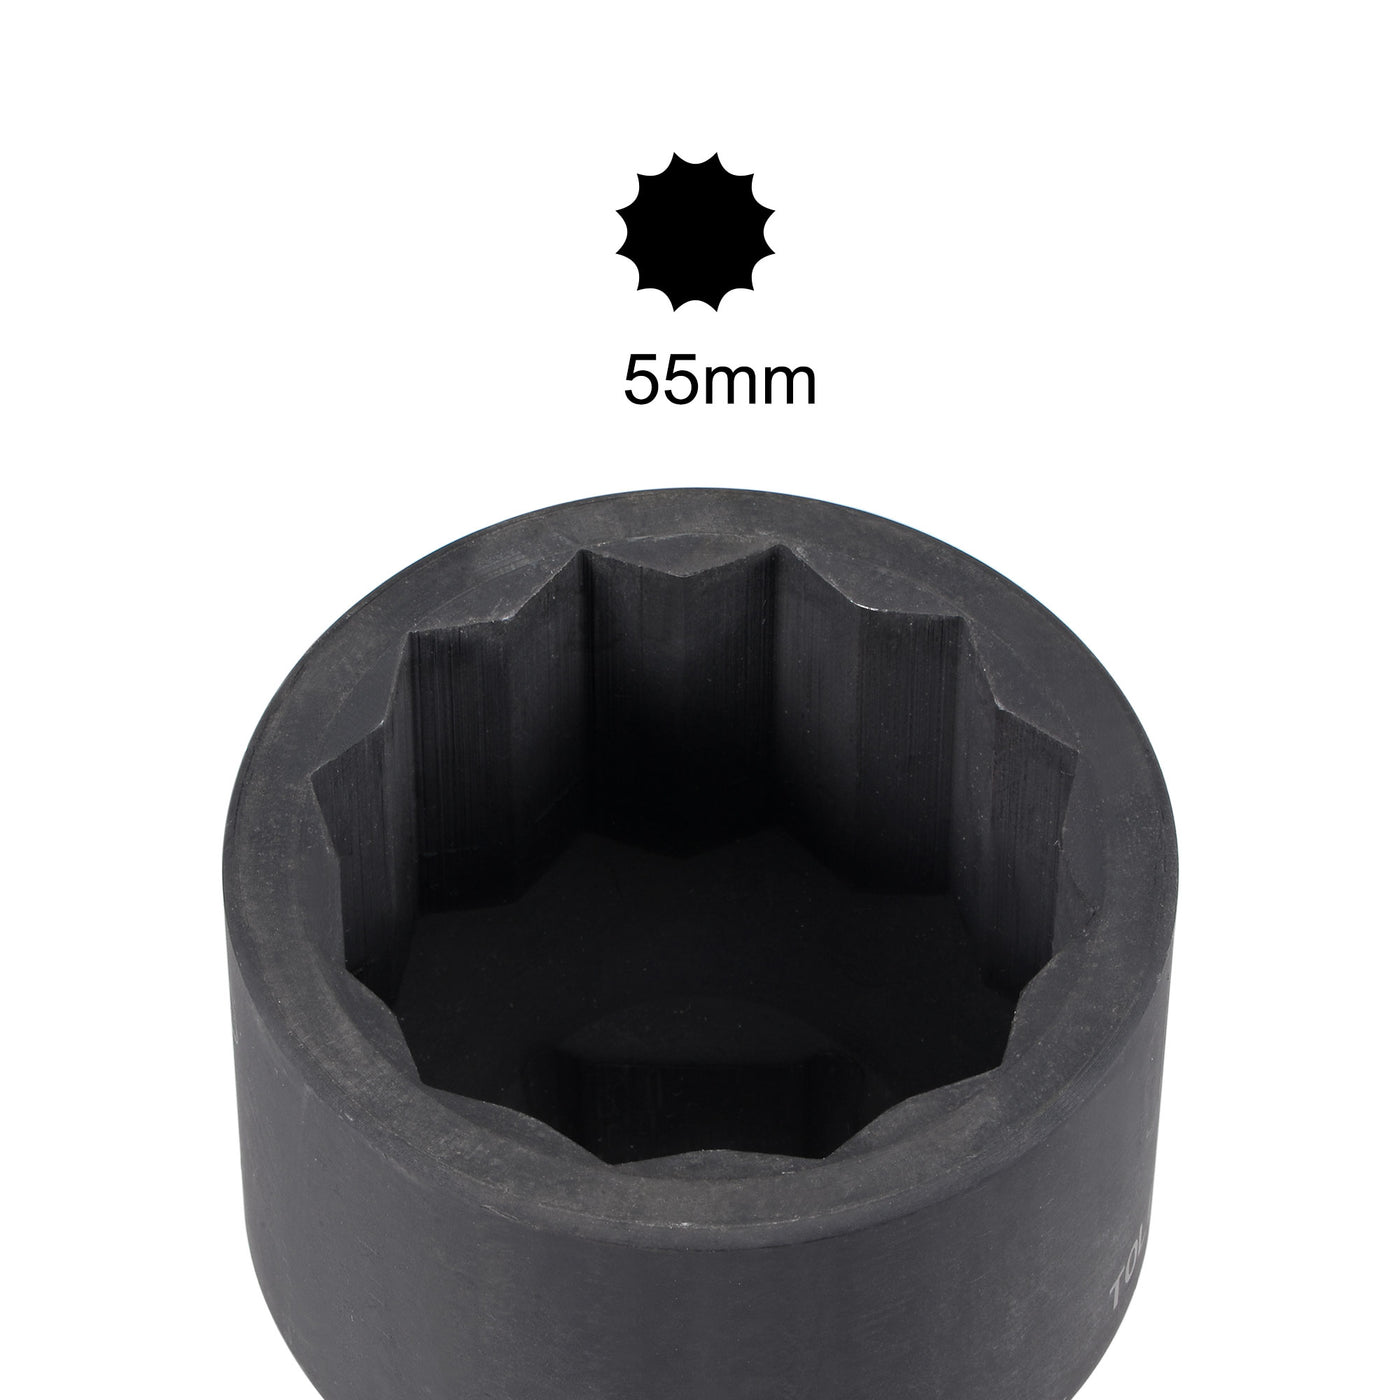 uxcell Uxcell 1-Inch Drive 55mm 12-Point Impact Socket, CR-MO Steel 80mm Length, Standard Metric Sizes